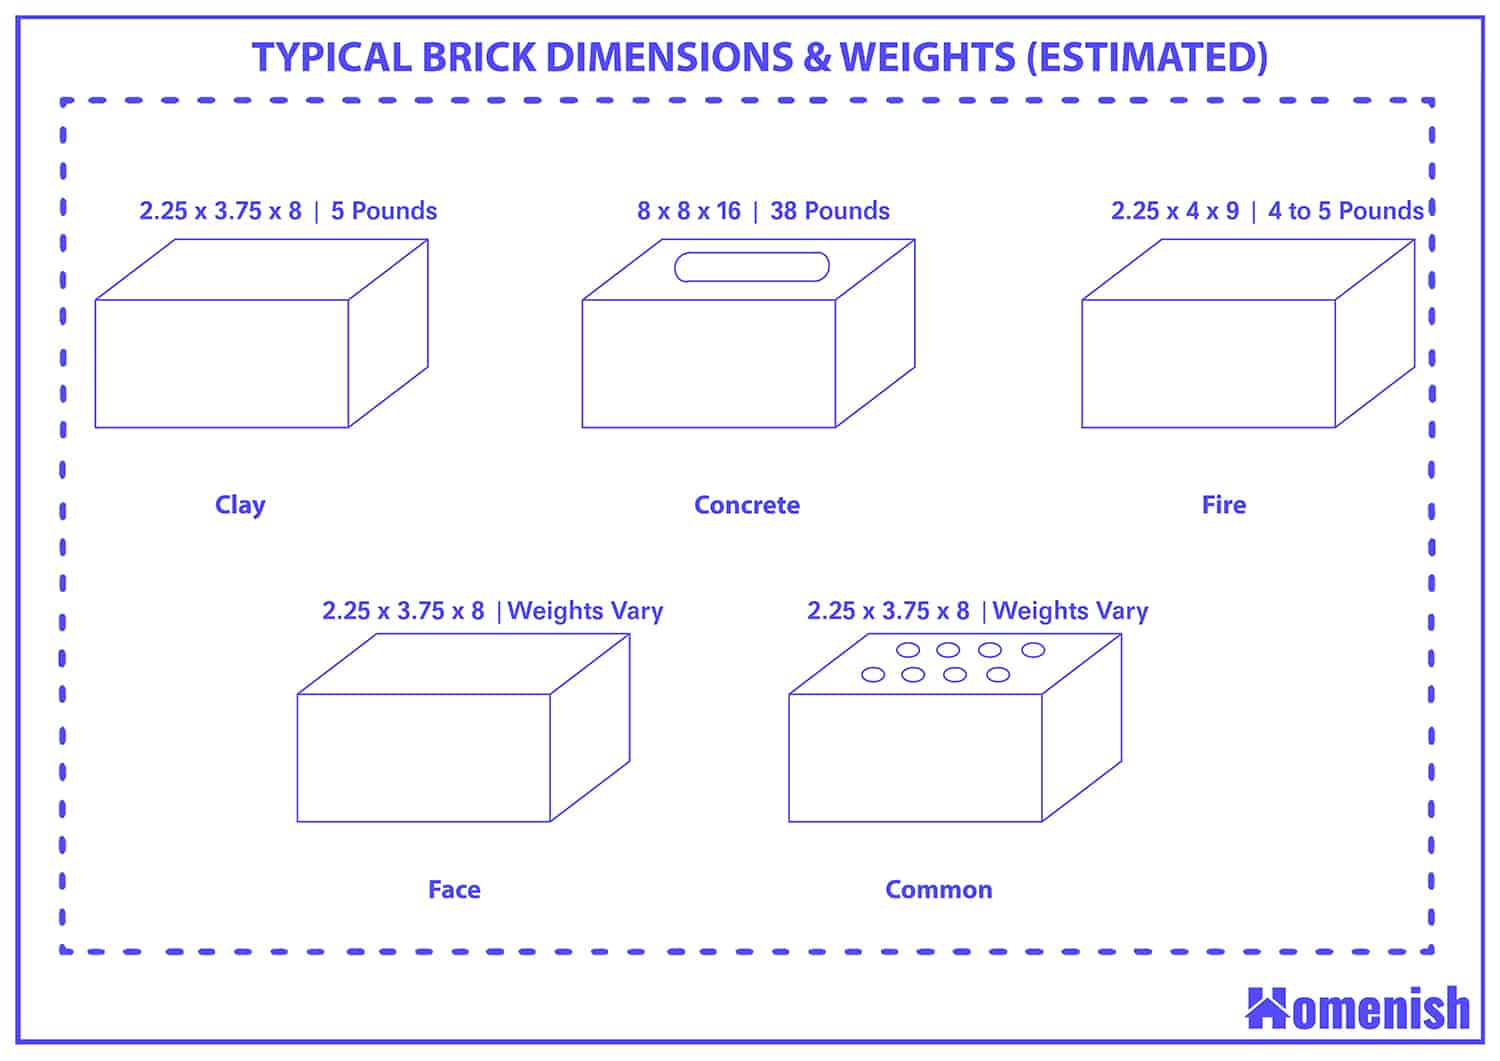 Typical brick dimensions & weights